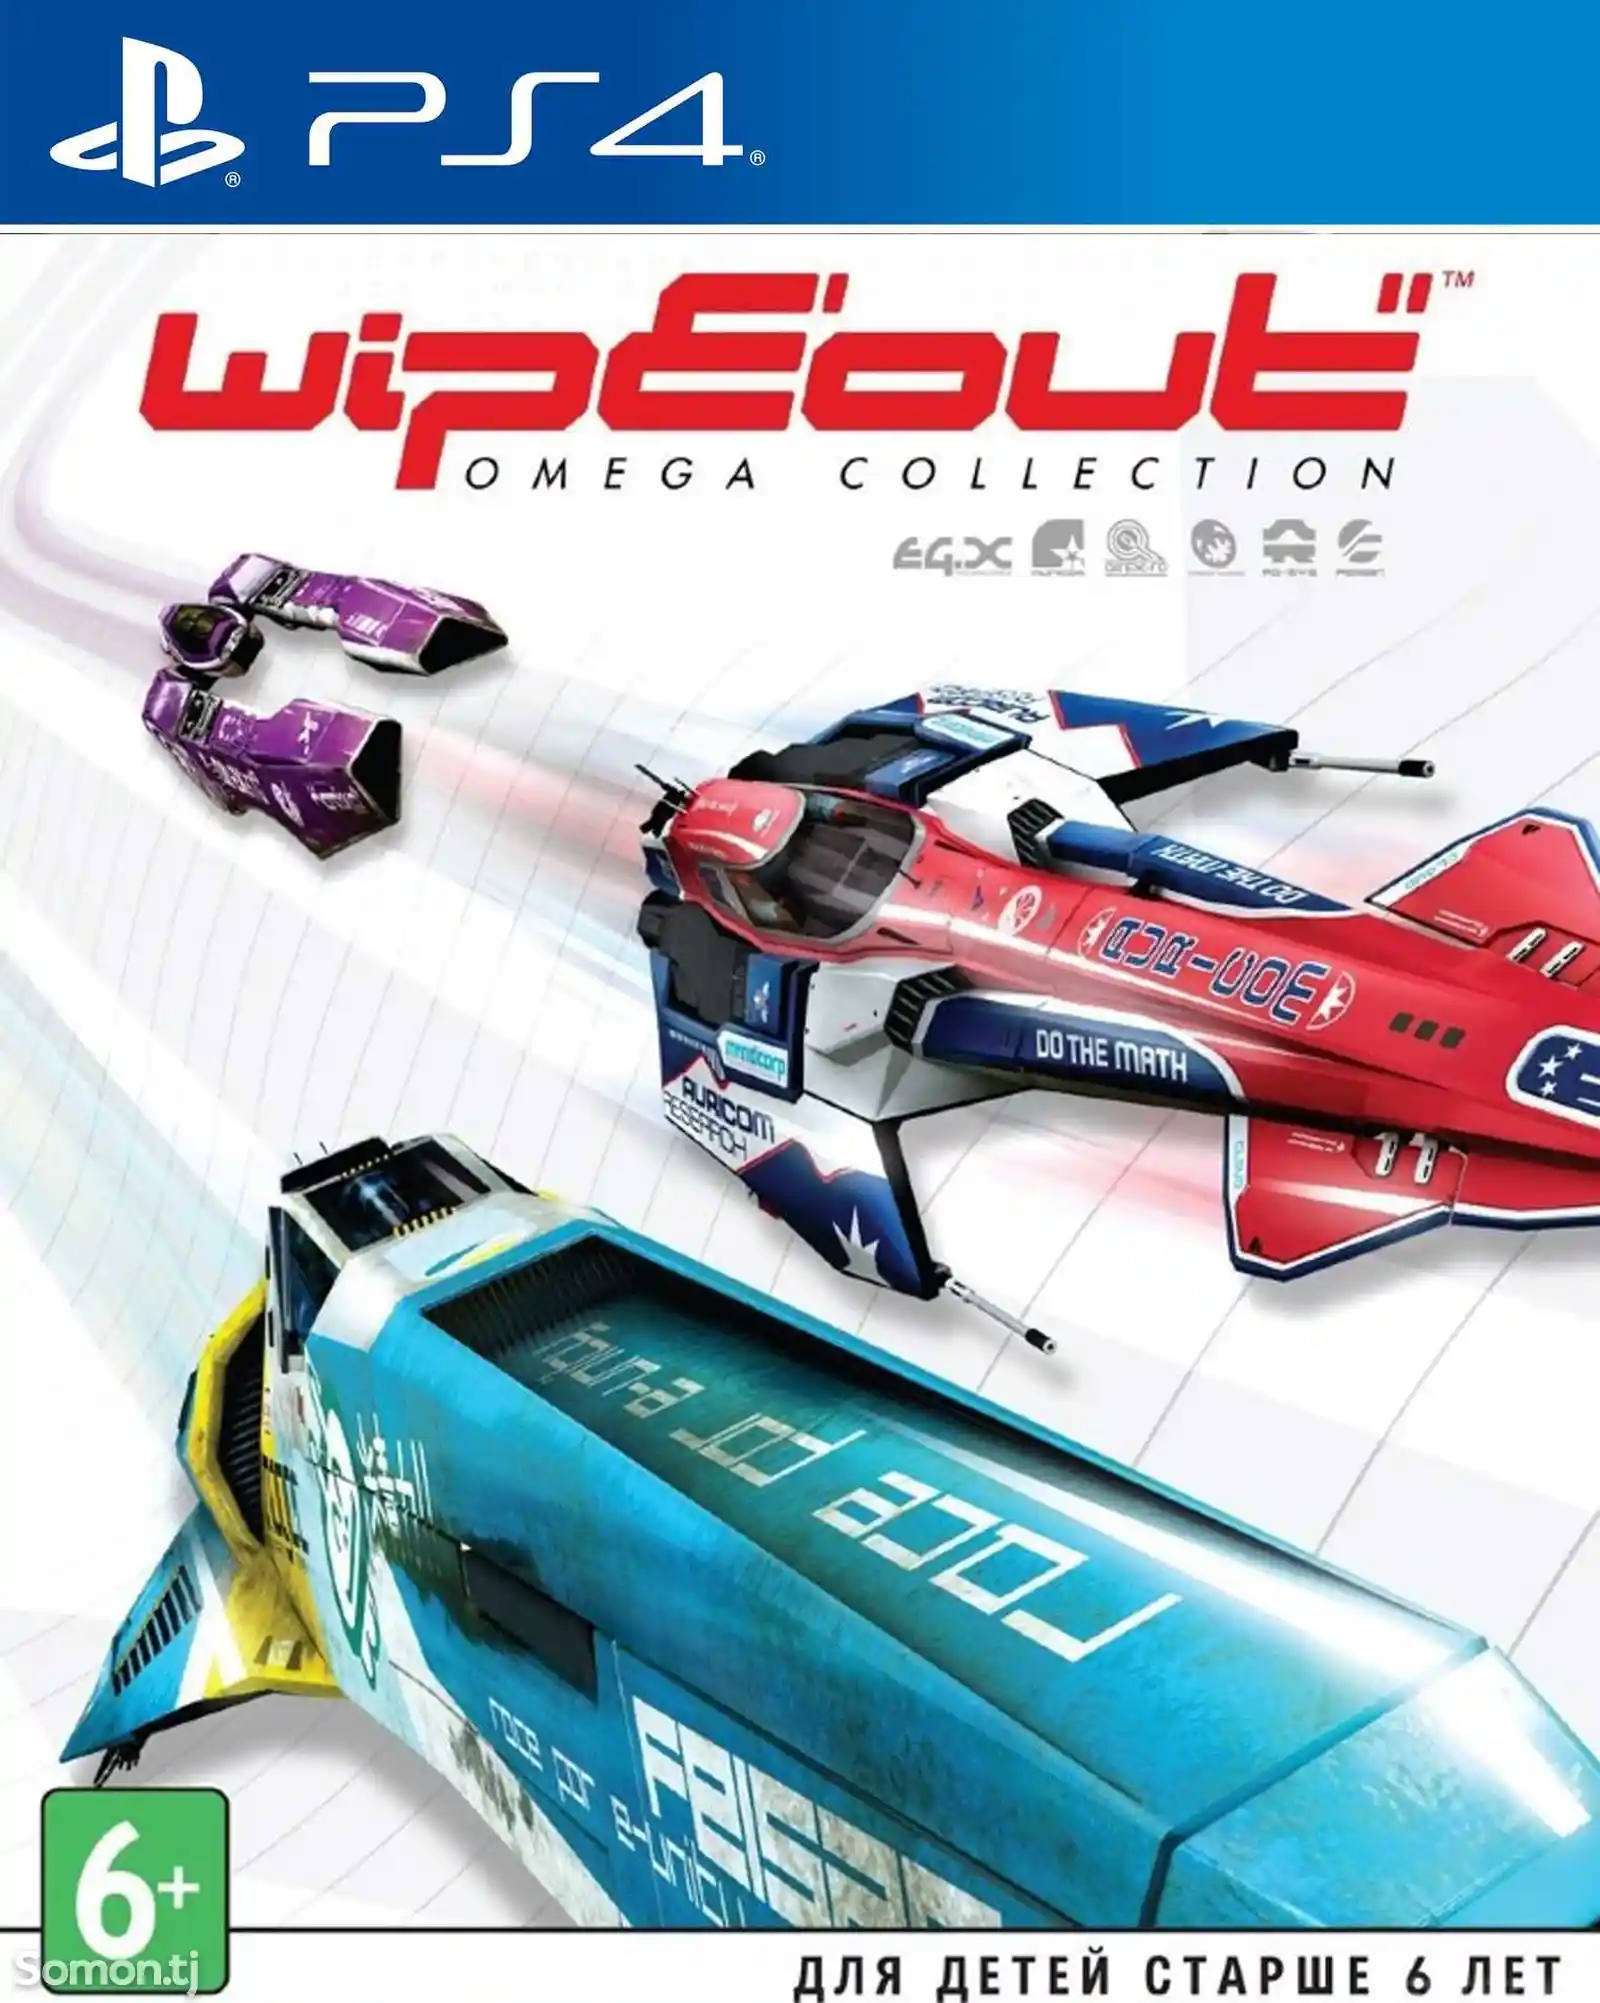 Игра Wipeout omega collection для PS-4 / 5.05 / 6.72 / 7.02 / 7.55 / 9.00 /-1